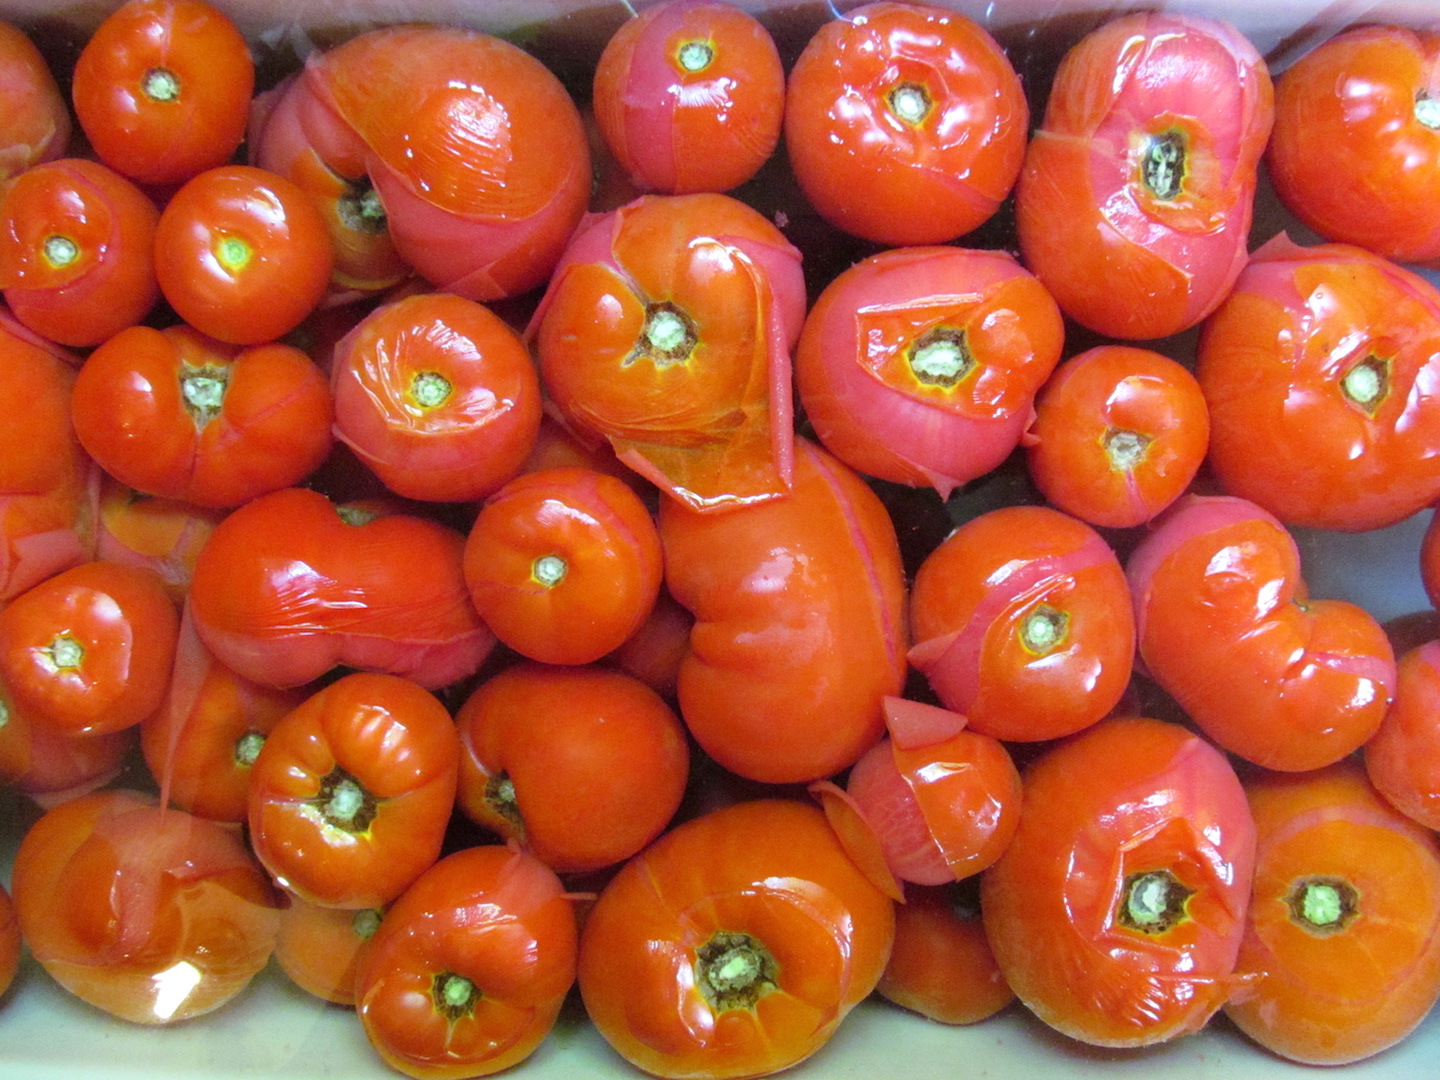 Enjoy Seedless Tomatoes with These Varieties - Pressure Cooking & Tomato Juicing Solutions